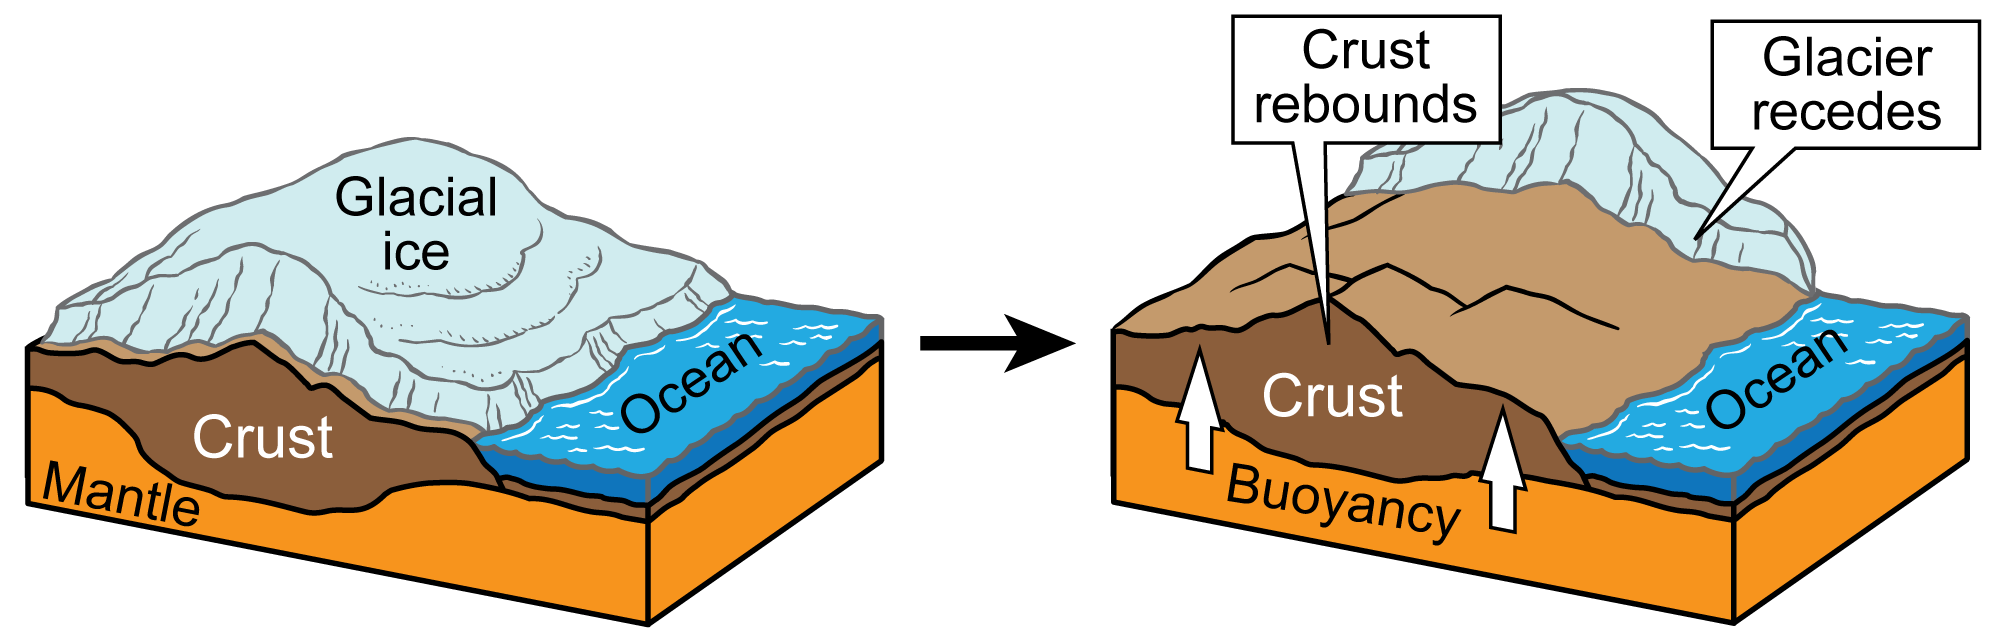 Diagram illustrating isostacy. The diagram consists of two figures. In figure one, glacial ice covers continental crust, causing the crust to sink into the mantle. In figure 2, the ice has retreated from the continental crust, and the crust rides higher in the mantle due to buoyancy.